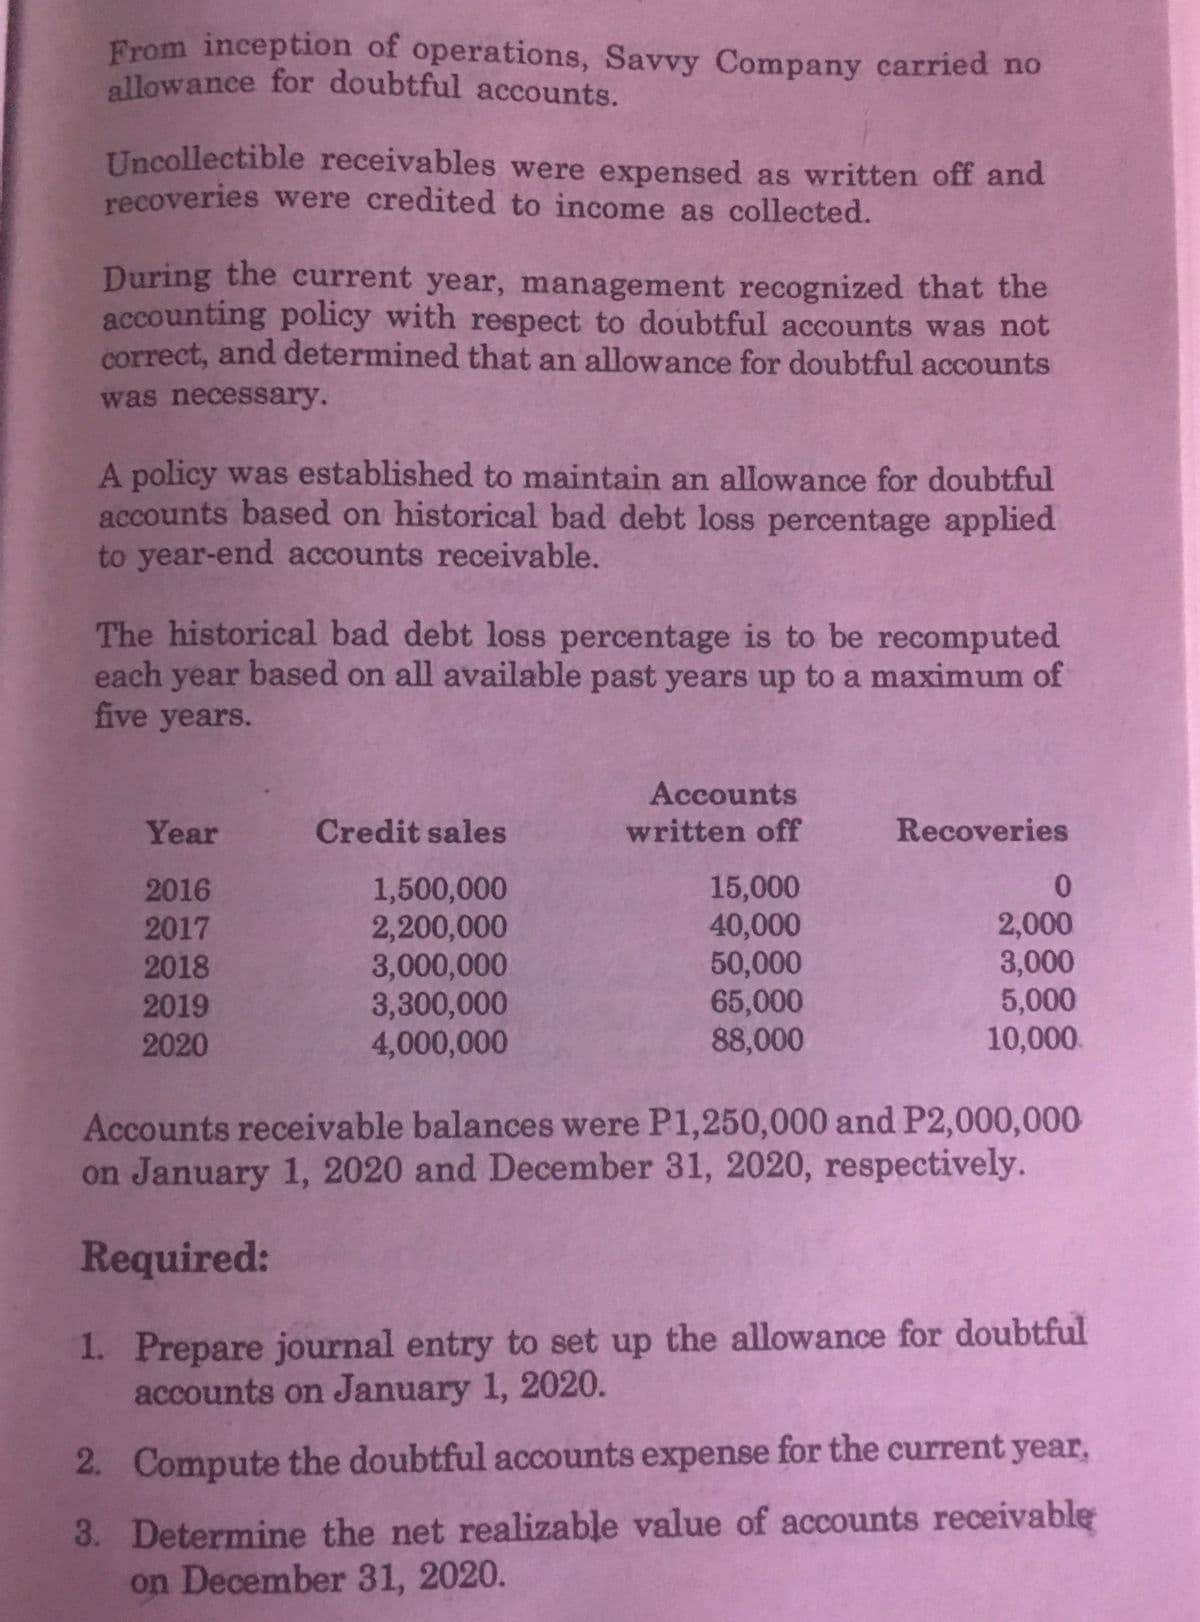 allowance for doubtful accounts.
From inception of operations, Savvy Company carried no
Uncollectible receivables were expensed as written off and
recoveries were credited to income as collected.
During the current year, management recognized that the
accounting policy with respect to doubtful accounts was not
correct, and determined that an allowance for doubtful accounts
was necessary.
A policy was established to maintain an allowance for doubtful
accounts based on historical bad debt loss percentage applied
to year-end accounts receivable.
The historical bad debt loss percentage is to be recomputed
each year based on all available past years up to a maximum of
five years.
Accounts
Year
Credit sales
written off
Recoveries
15,000
40,000
50,000
65,000
88,000
0.
1,500,000
2,200,000
3,000,000
3,300,000
4,000,000
2016
2,000
3,000
5,000
10,000.
2017
2018
2019
2020
Accounts receivable balances were P1,250,000 and P2,000,000
on January 1, 2020 and December 31, 2020, respectively.
Required:
1. Prepare journal entry to set up the allowance for doubtful
accounts on January 1, 2020.
2. Compute the doubtful accounts expense for the current year,
3. Determine the net realizable value of accounts receivable
on December 31, 2020.
